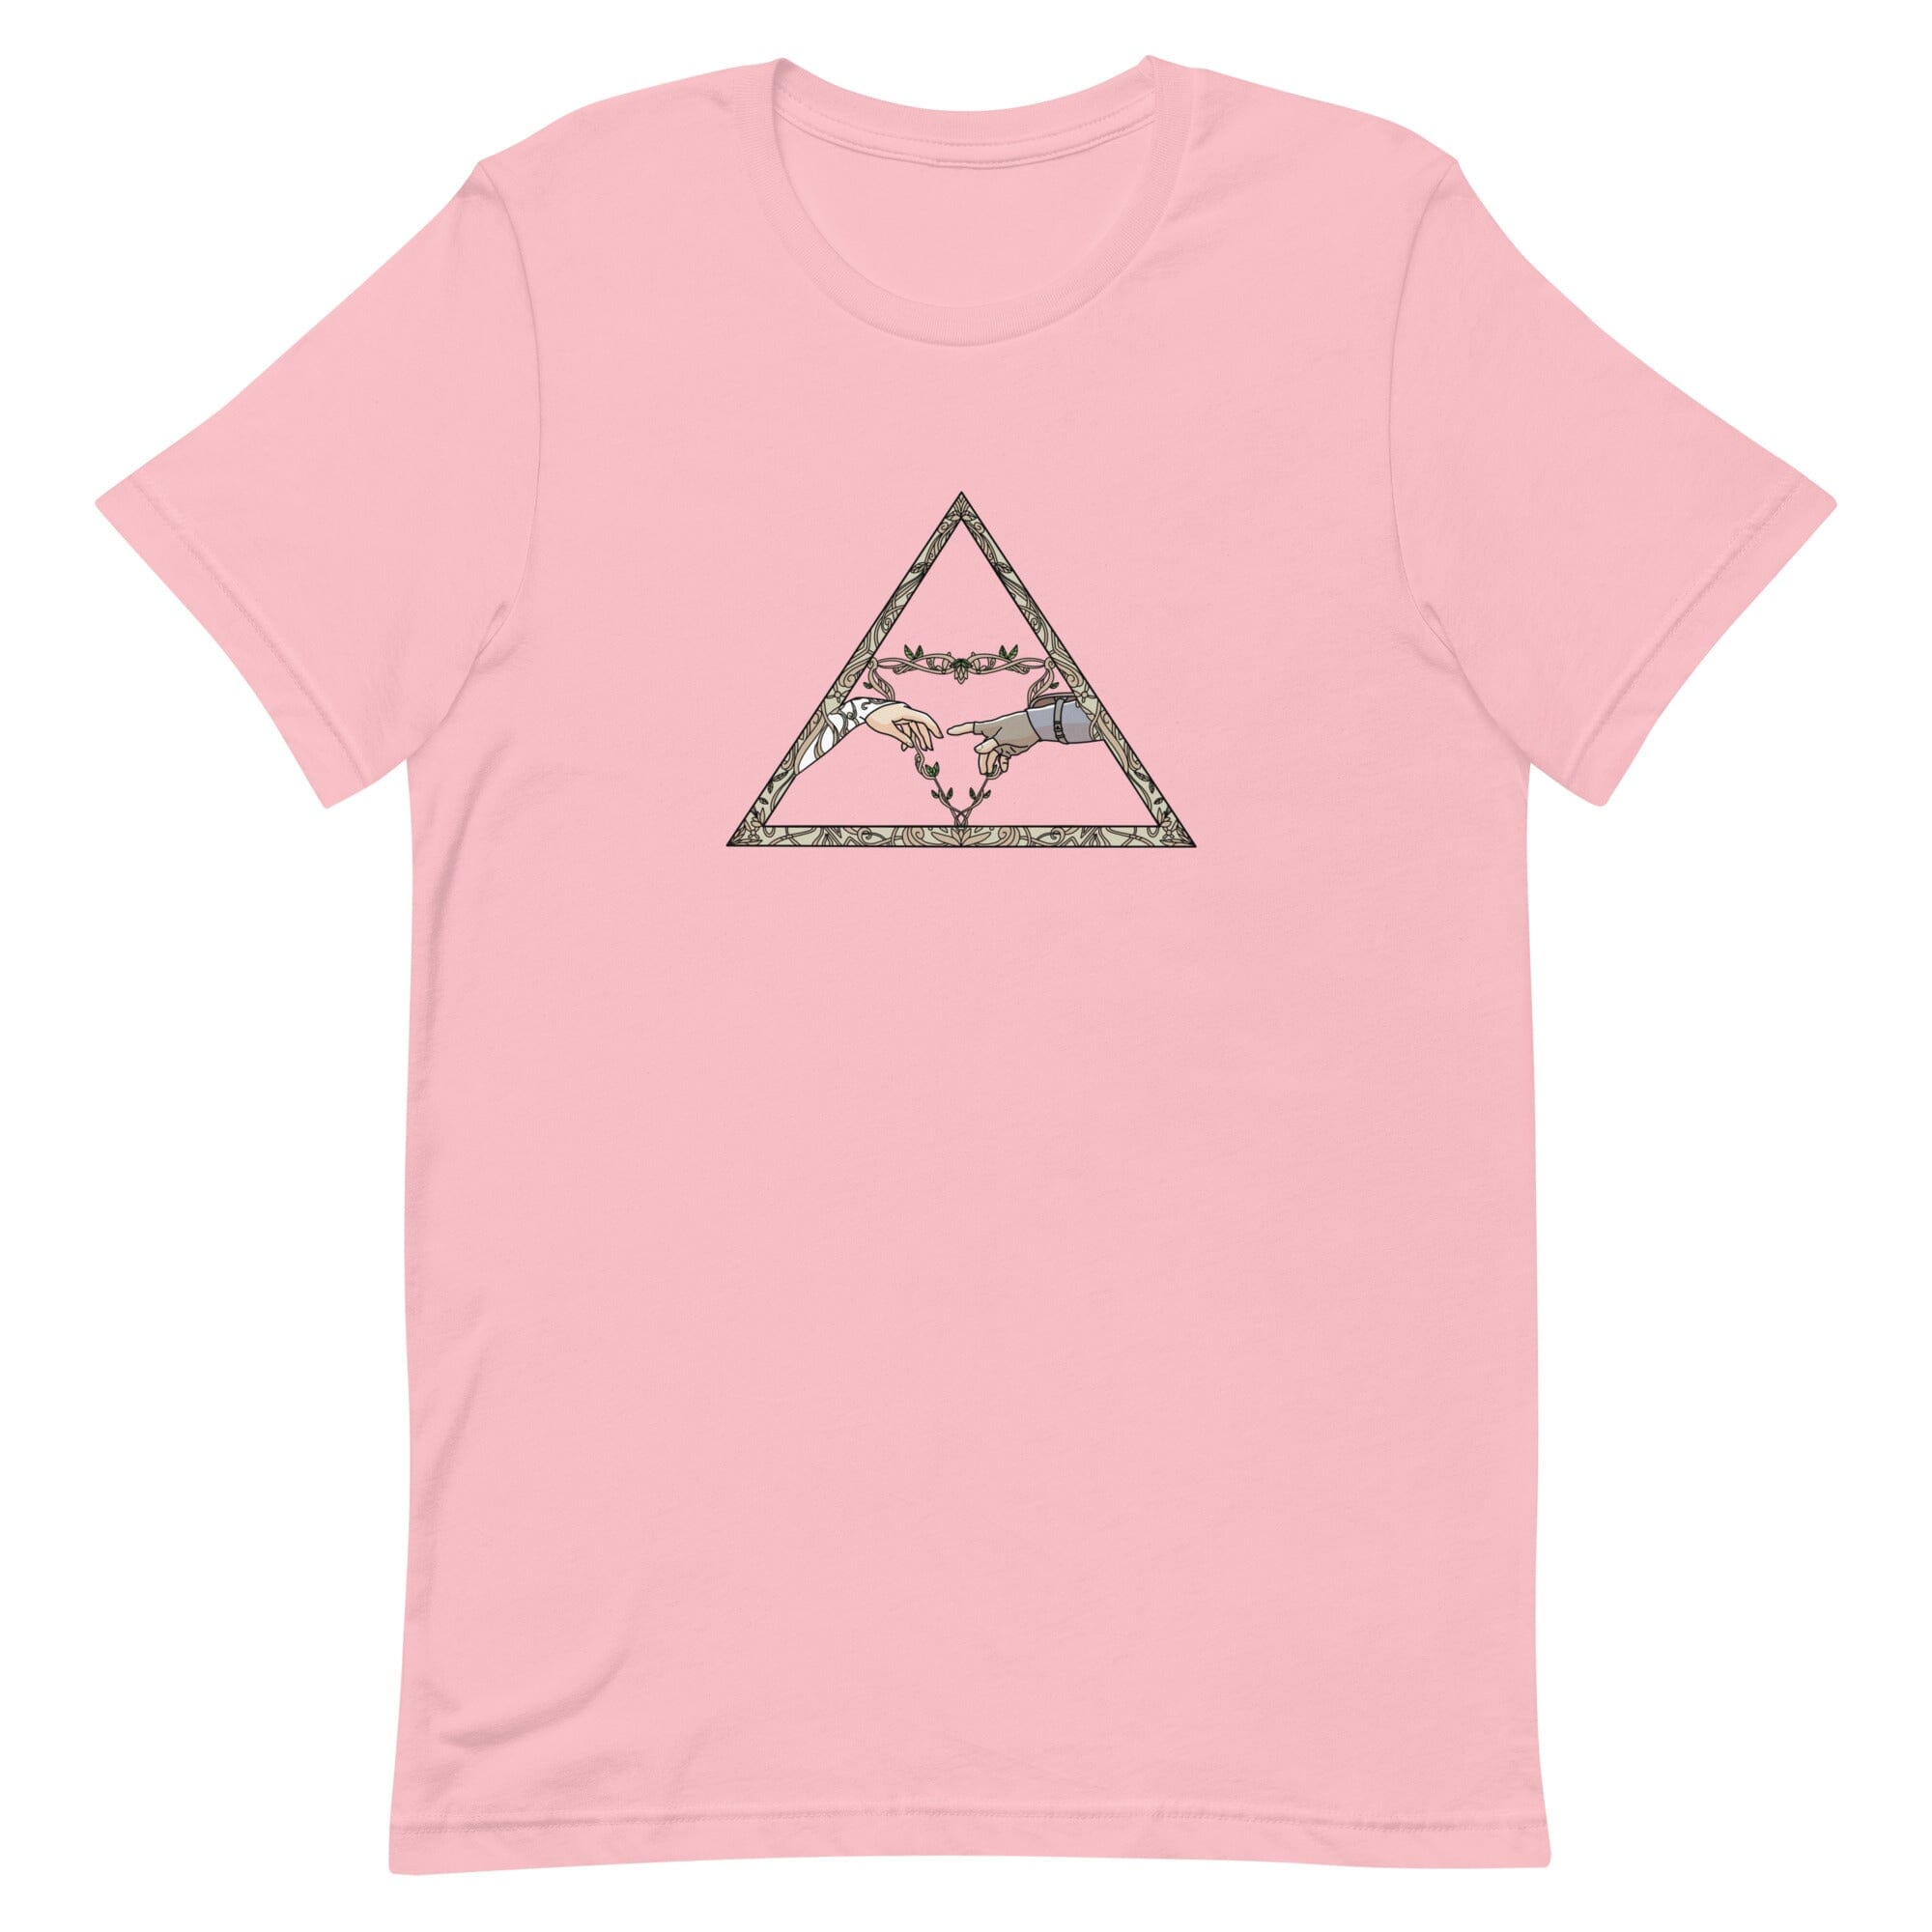 The Creation | Short-Sleeve Unisex T-Shirt | The Legend of Zelda T-Shirt Threads and Thistles Inventory Pink S 